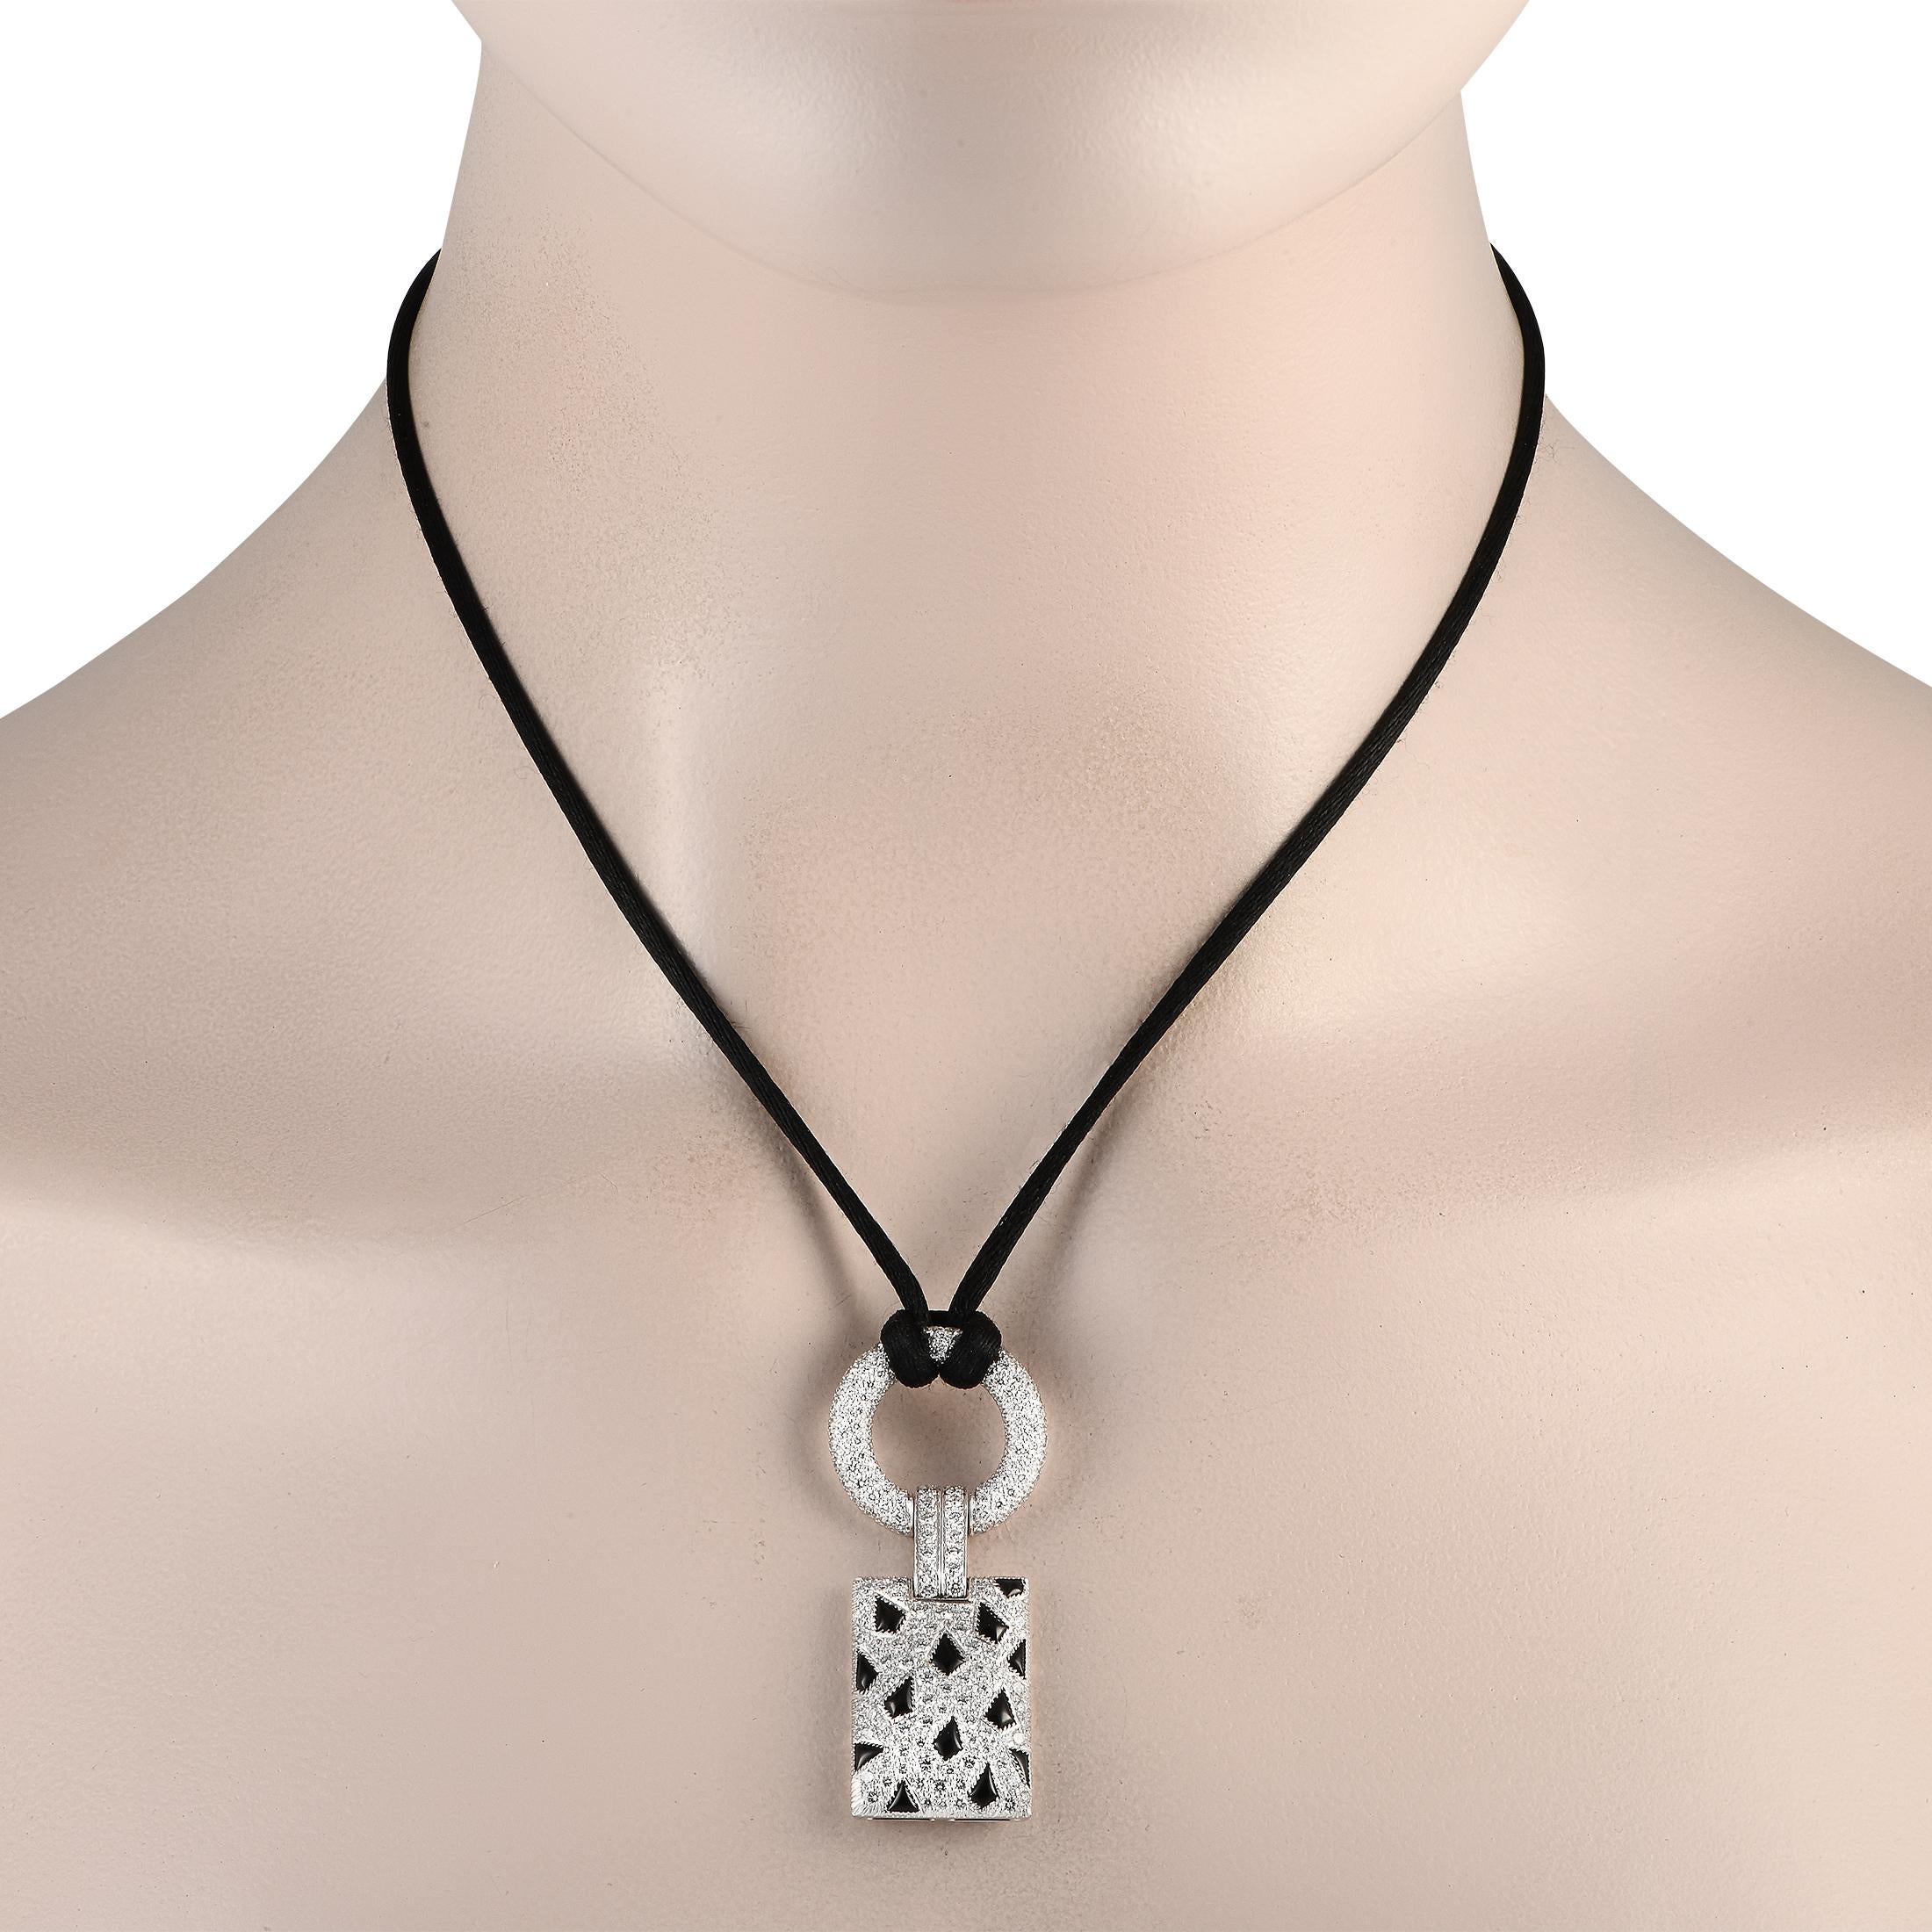 Diamonds with a total weight of 2.85 carats are beautifully juxtaposed with bold Onyx accents on this exquisite Cartier Panthere necklace. Suspended from a 28 cord, youll find a breathtaking 18K White Gold pendant measuring 2.0 long by 0.75